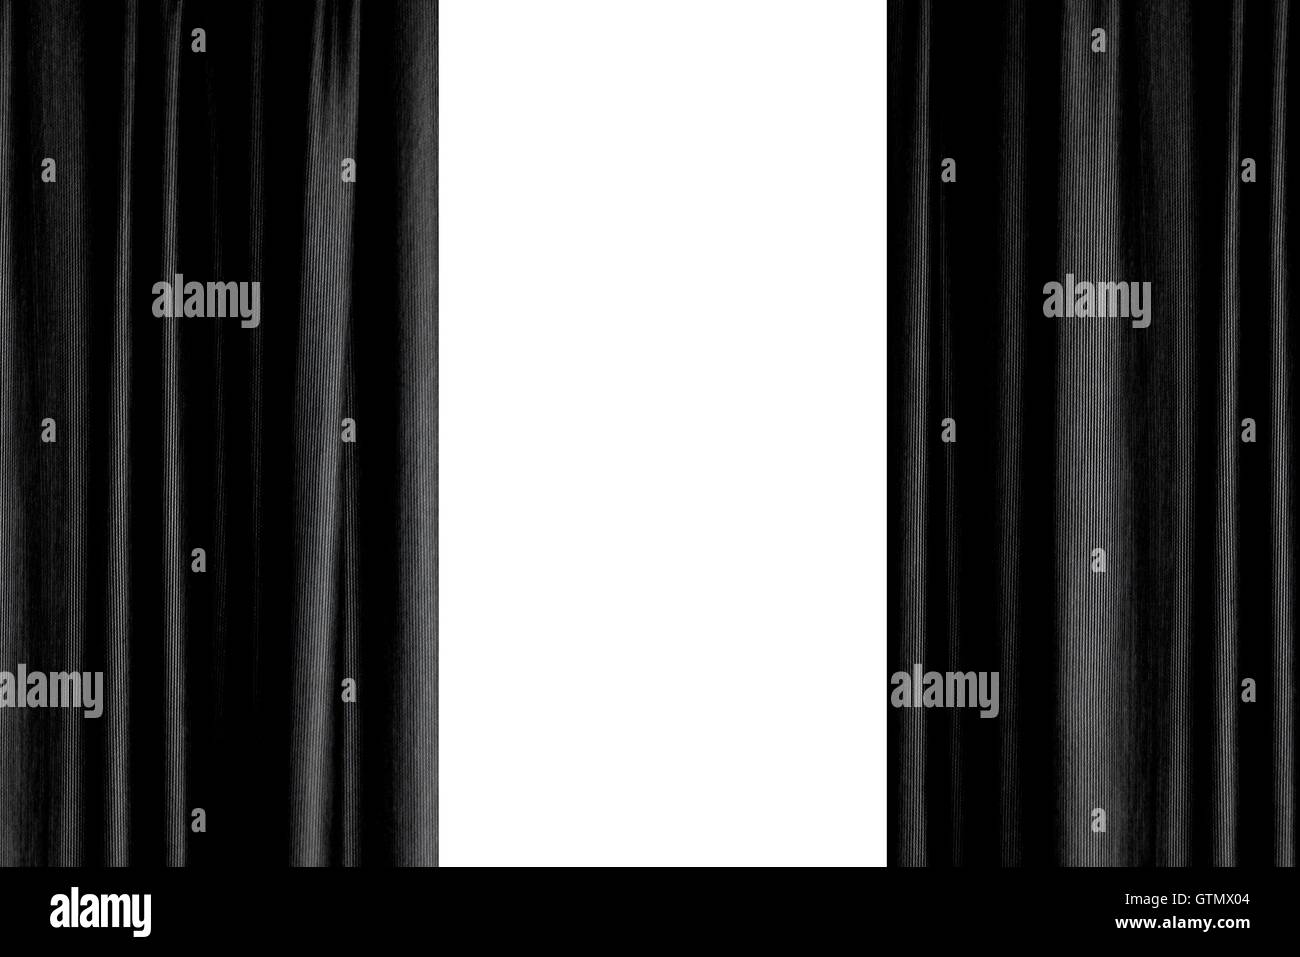 Gold curtains Black and White Stock Photos & Images - Alamy